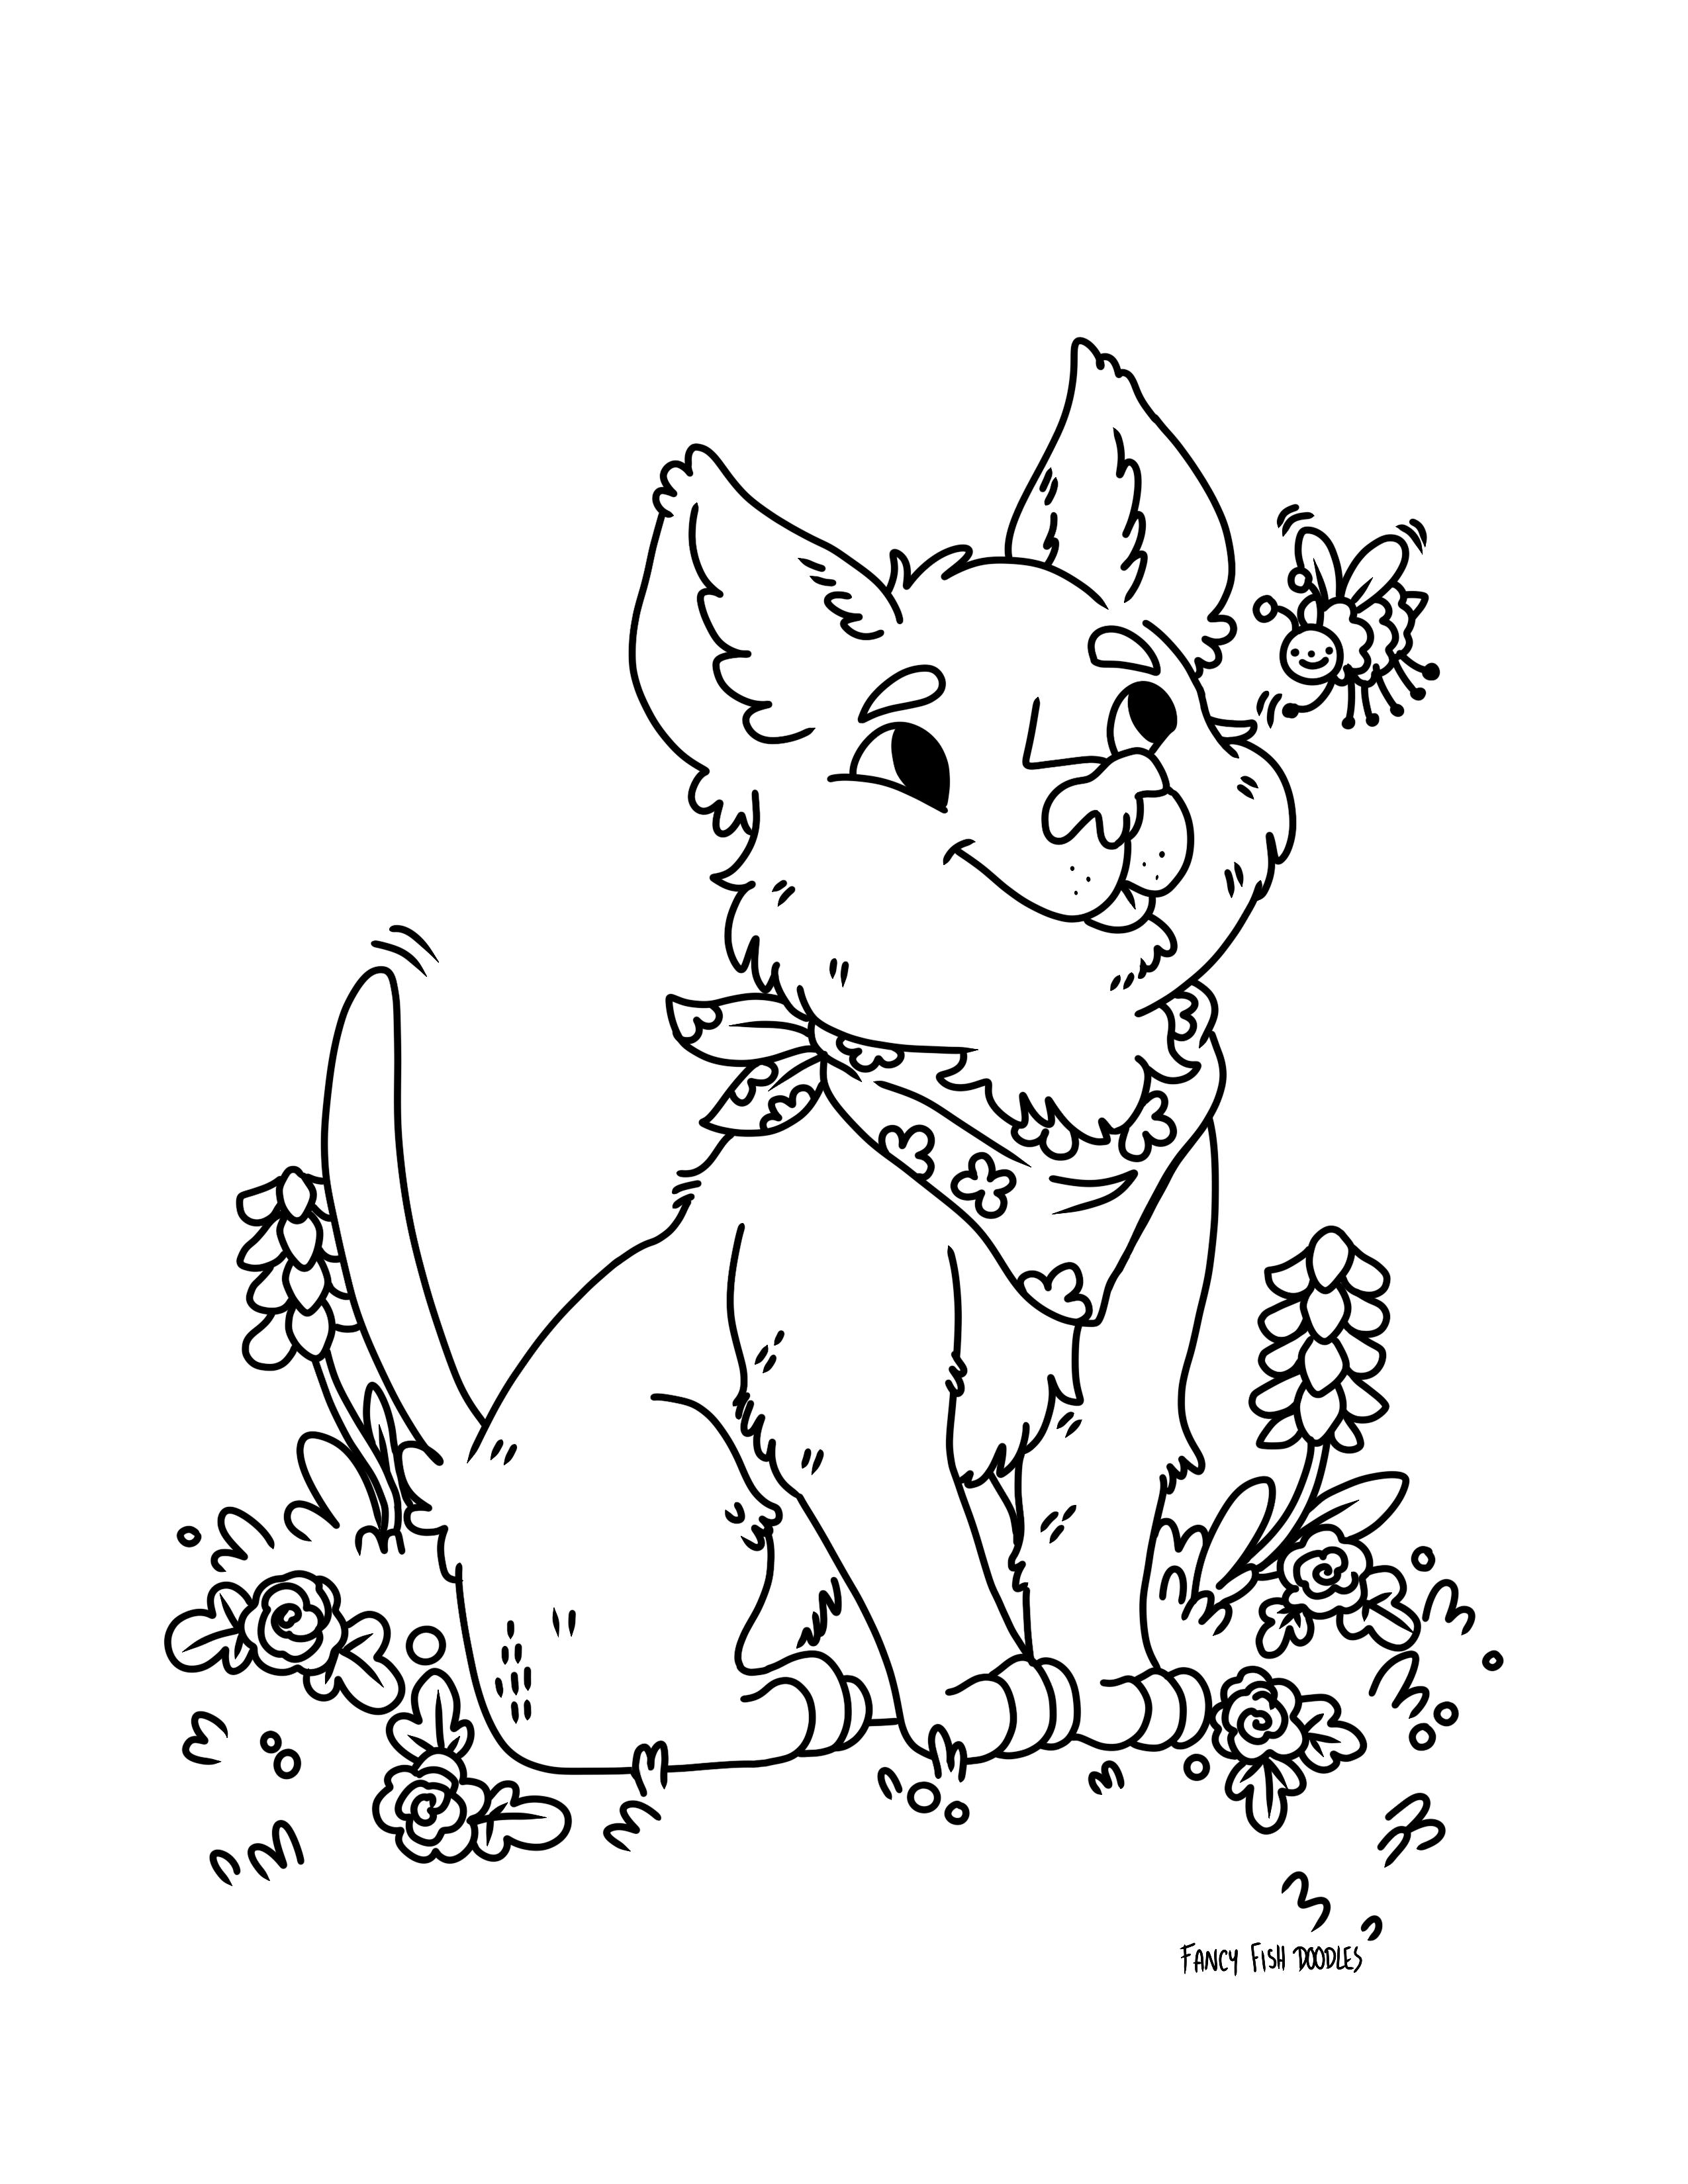 Rusty and a Bee coloring sheet